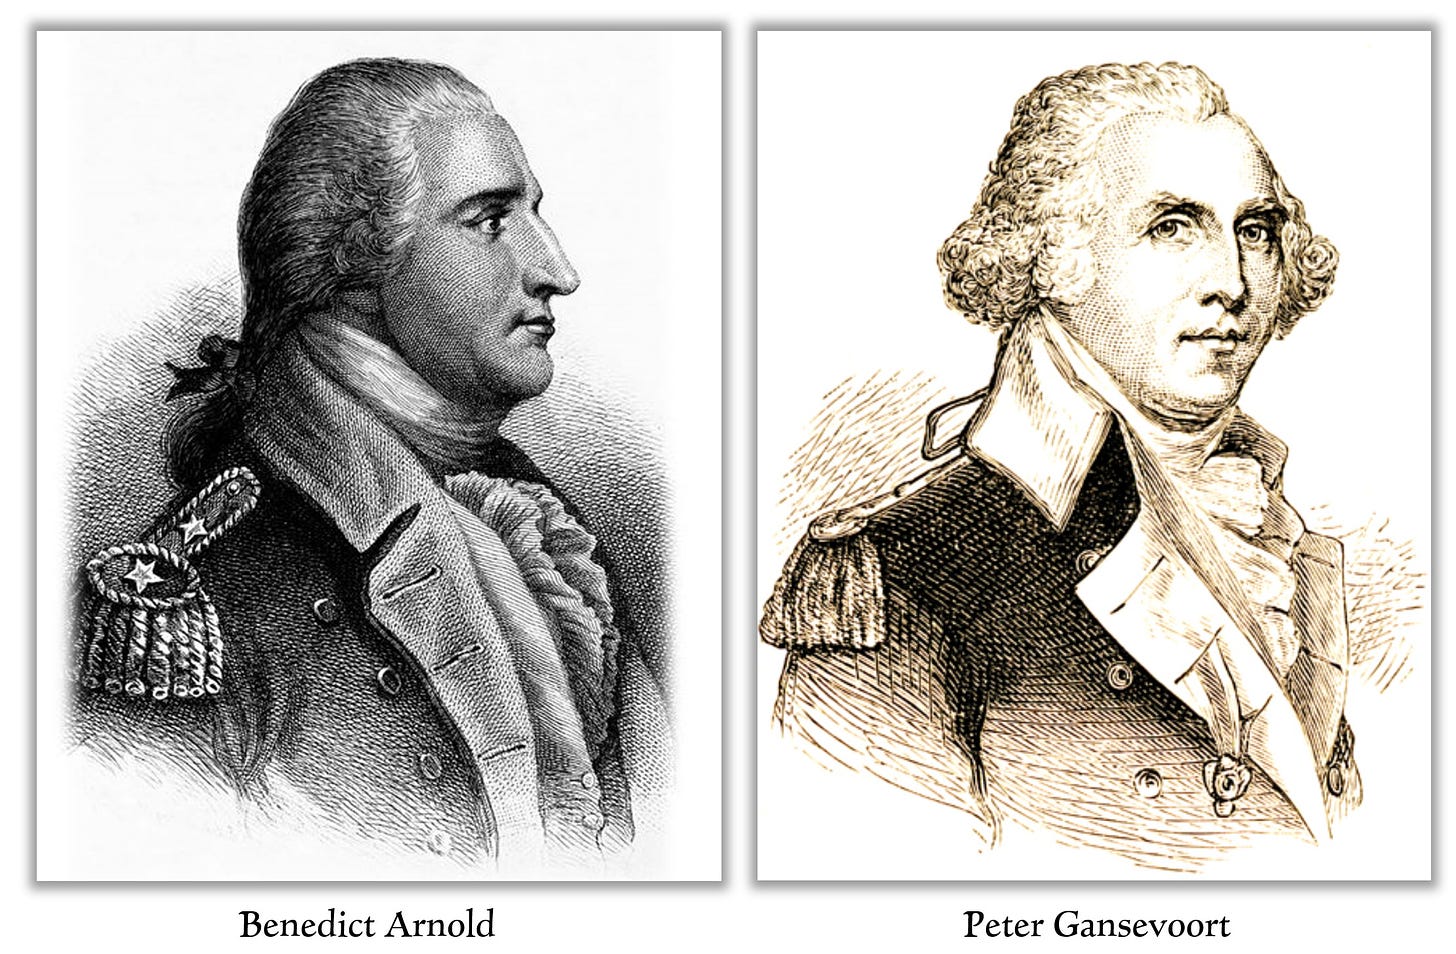 Sketches of of Benedict Arnold and Peter Gansevoort